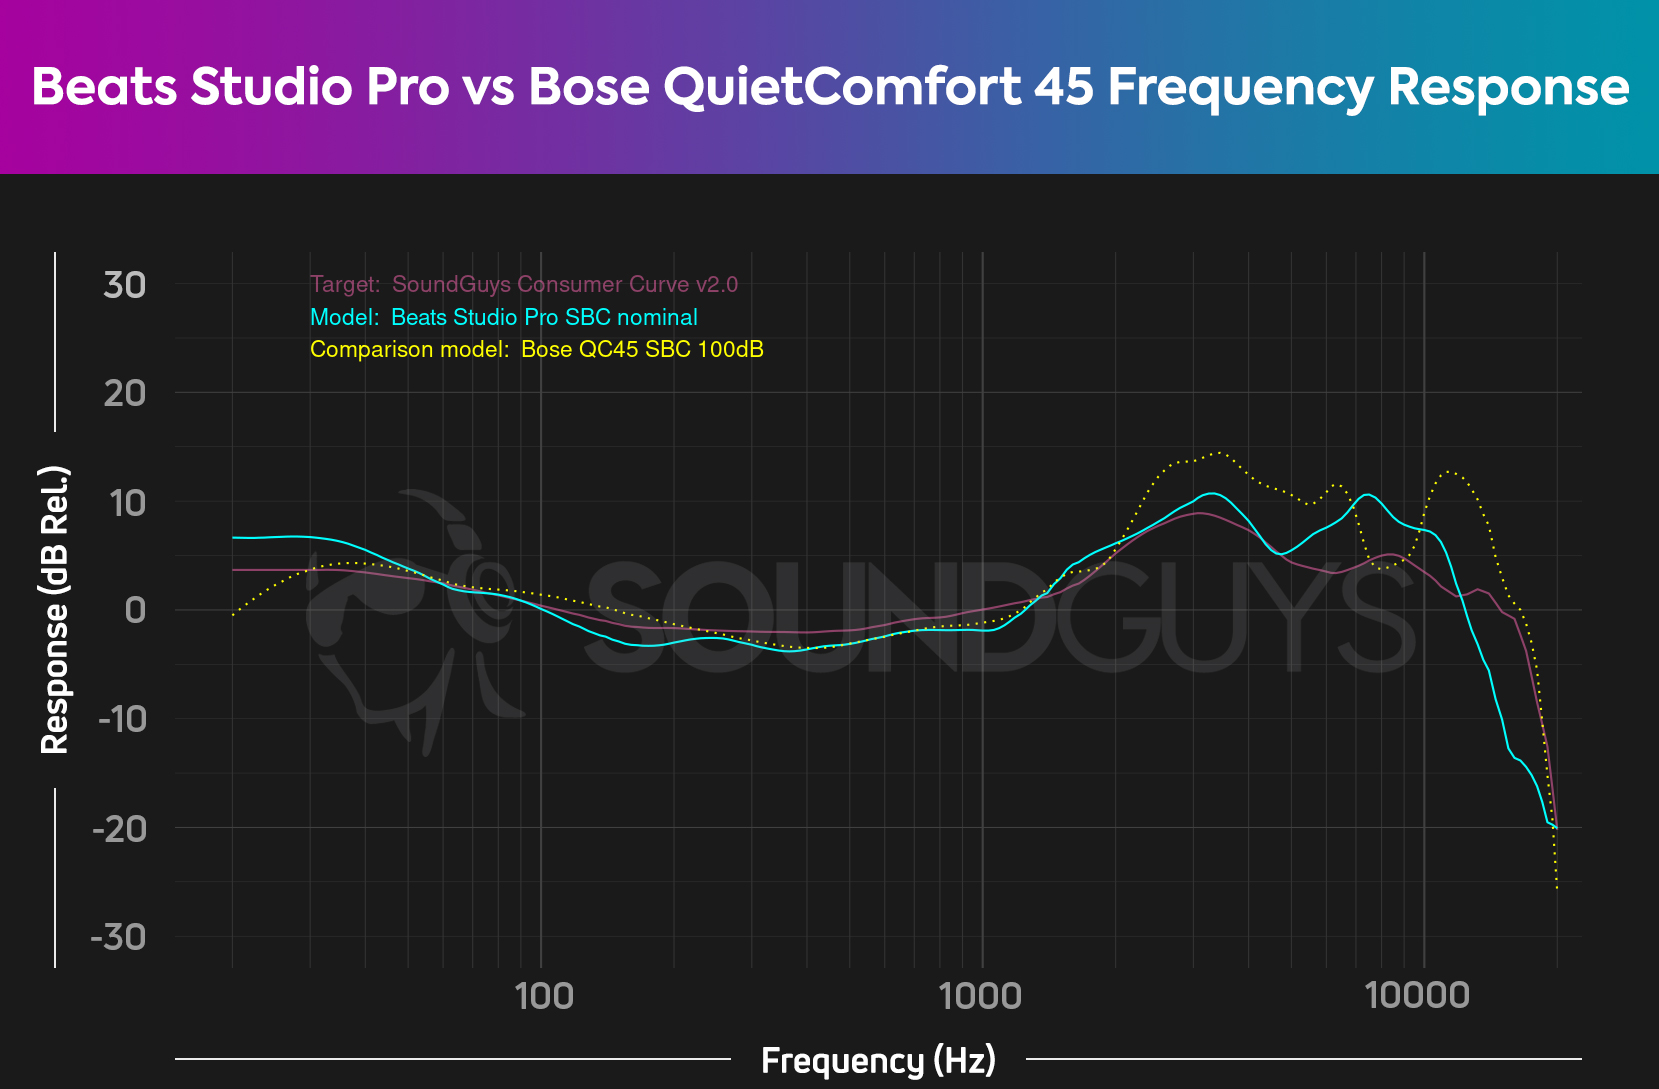 A chart shows the Beats Studio Pro and Bose QuietComfort 45 frequency responses compared to our headphone preference curve.